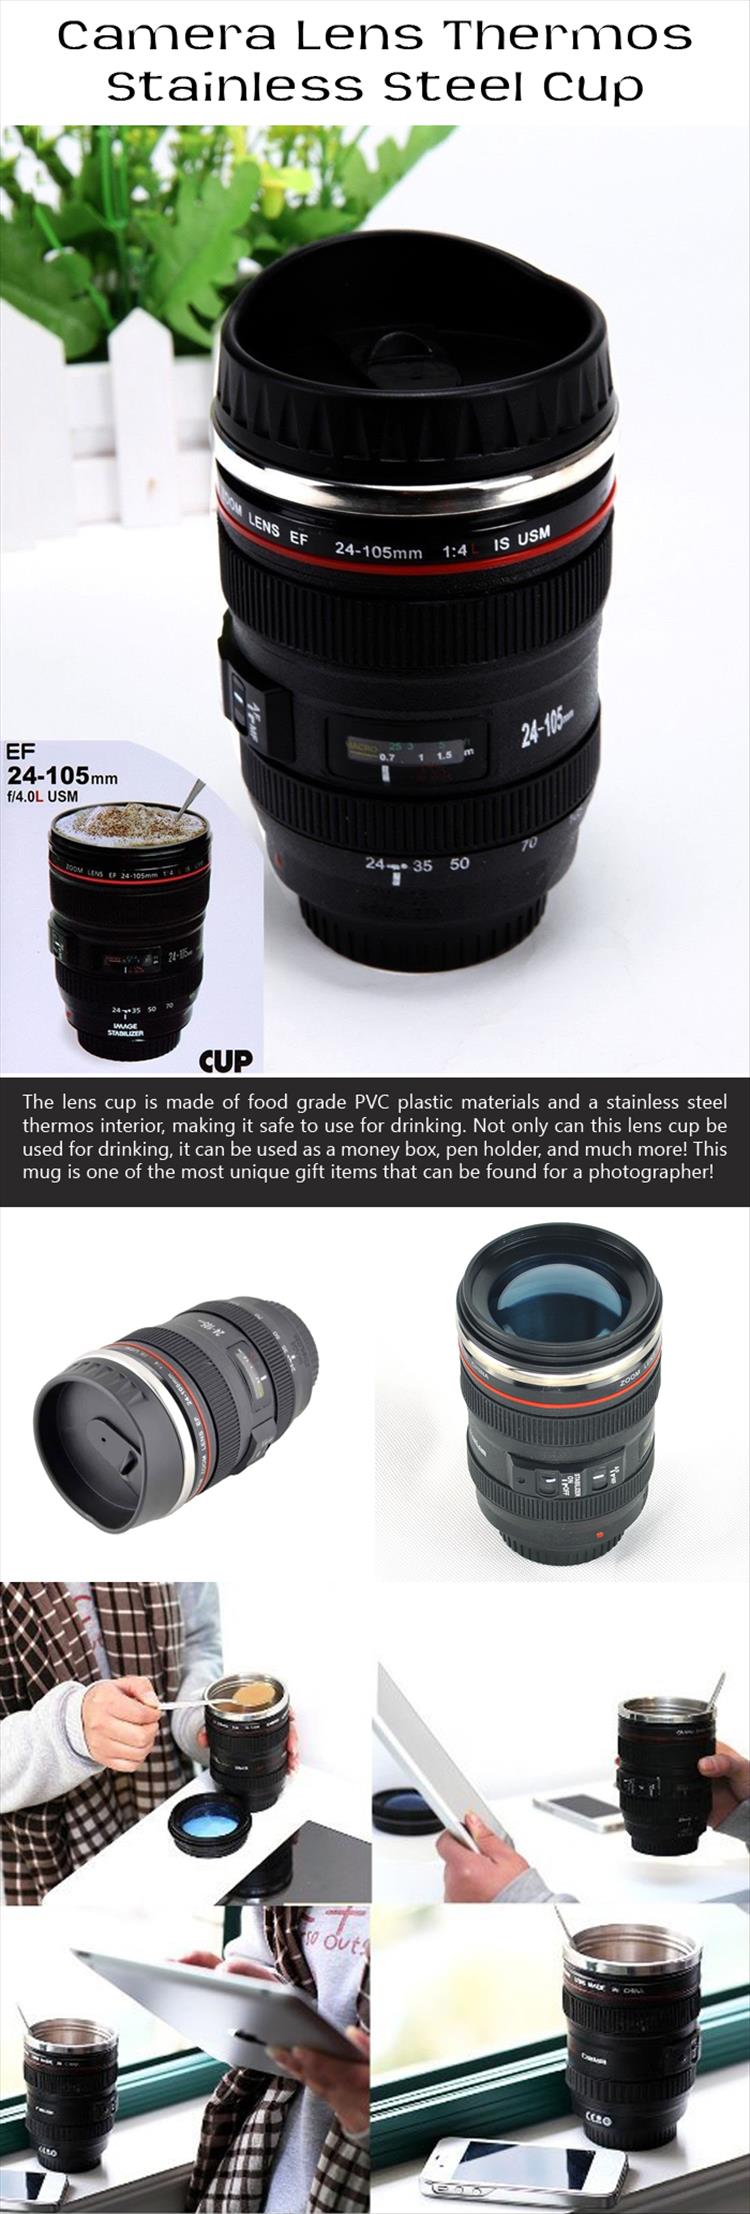 camera-lens-thermos-stainless-steel-cup